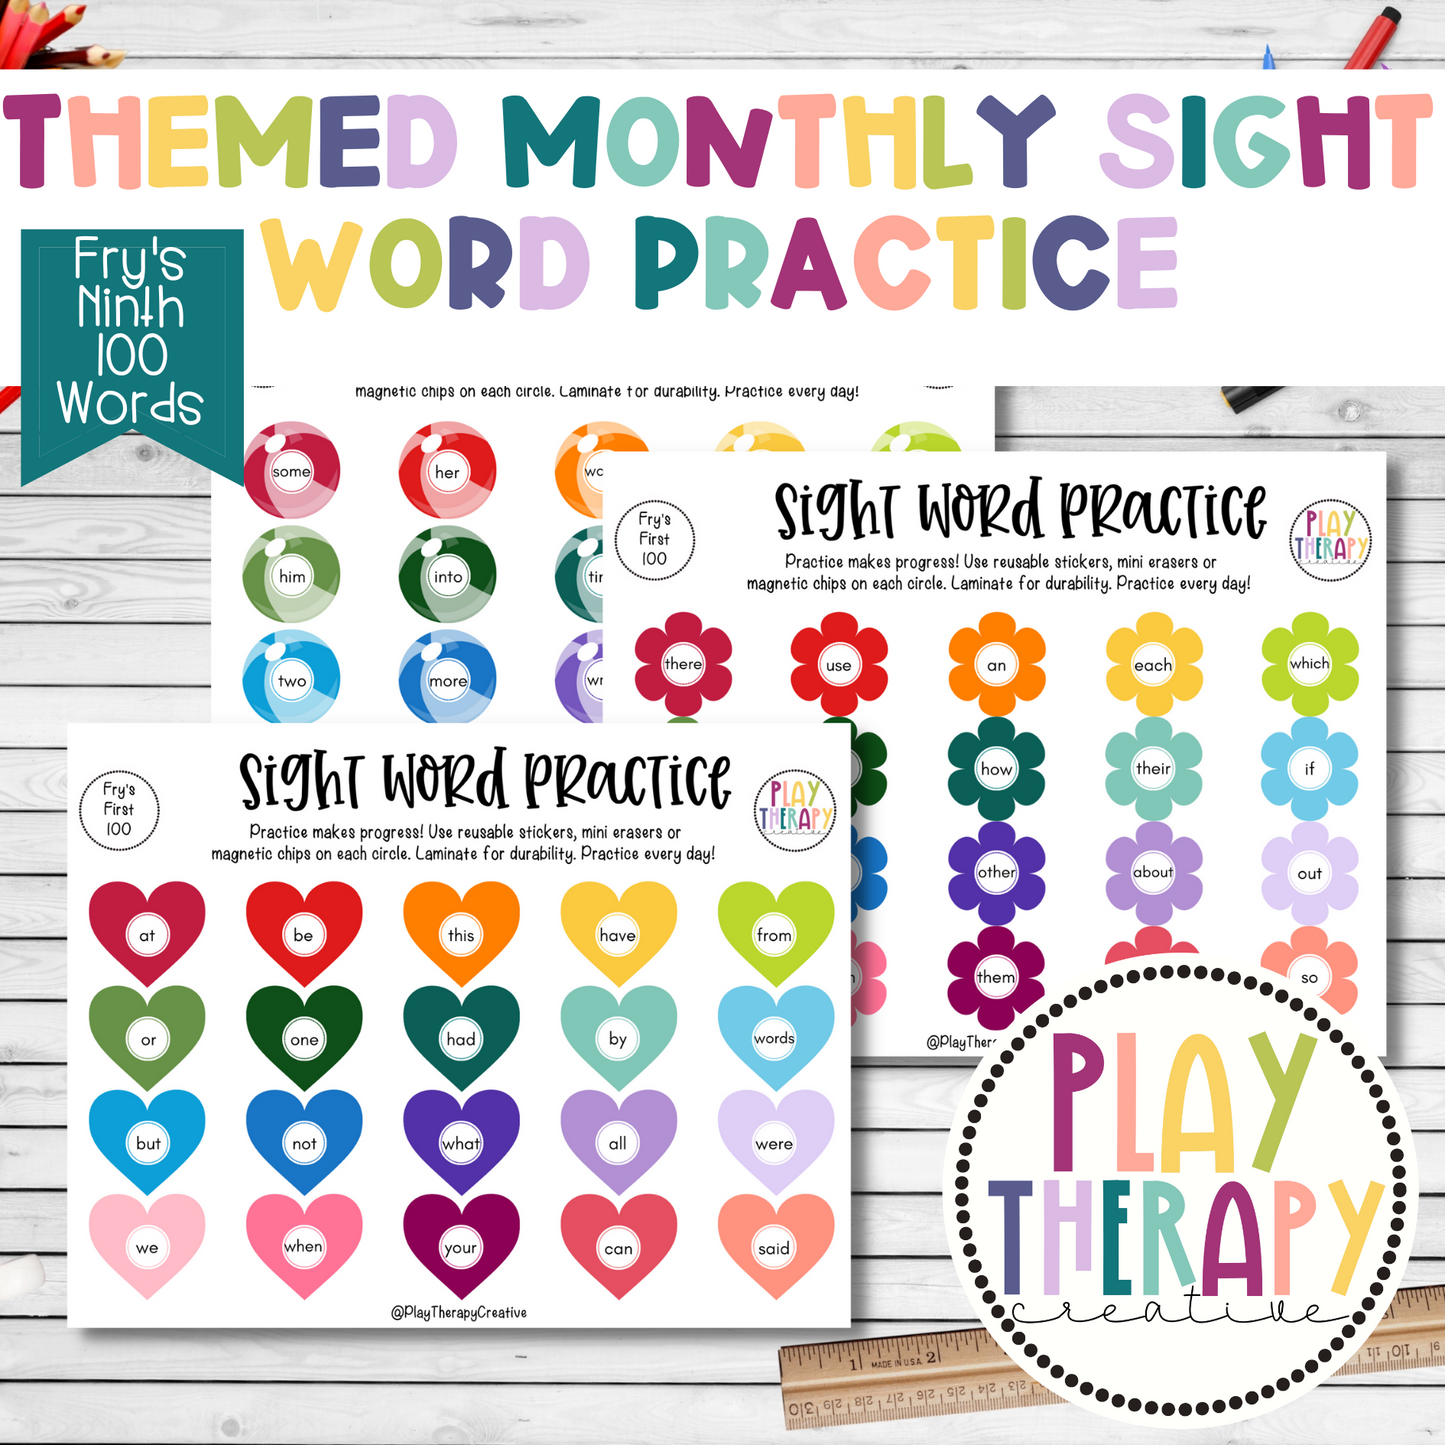 Themed Monthly Sight Word Practice / Fry’s Ninth 100 Sight Words